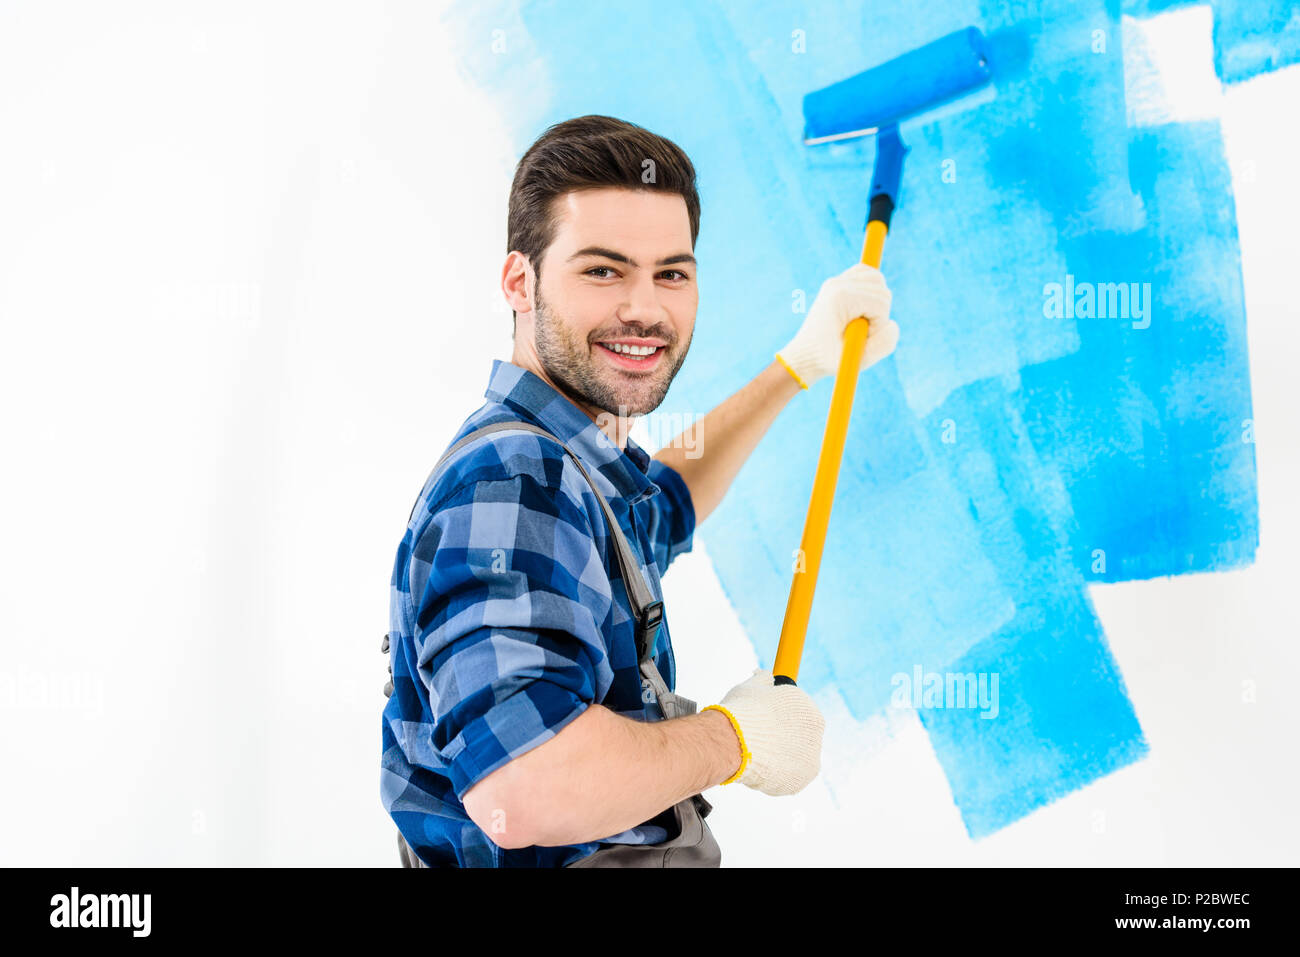 Smiling Handsome Man Painting Wall With Blue Paint P2BWEC 